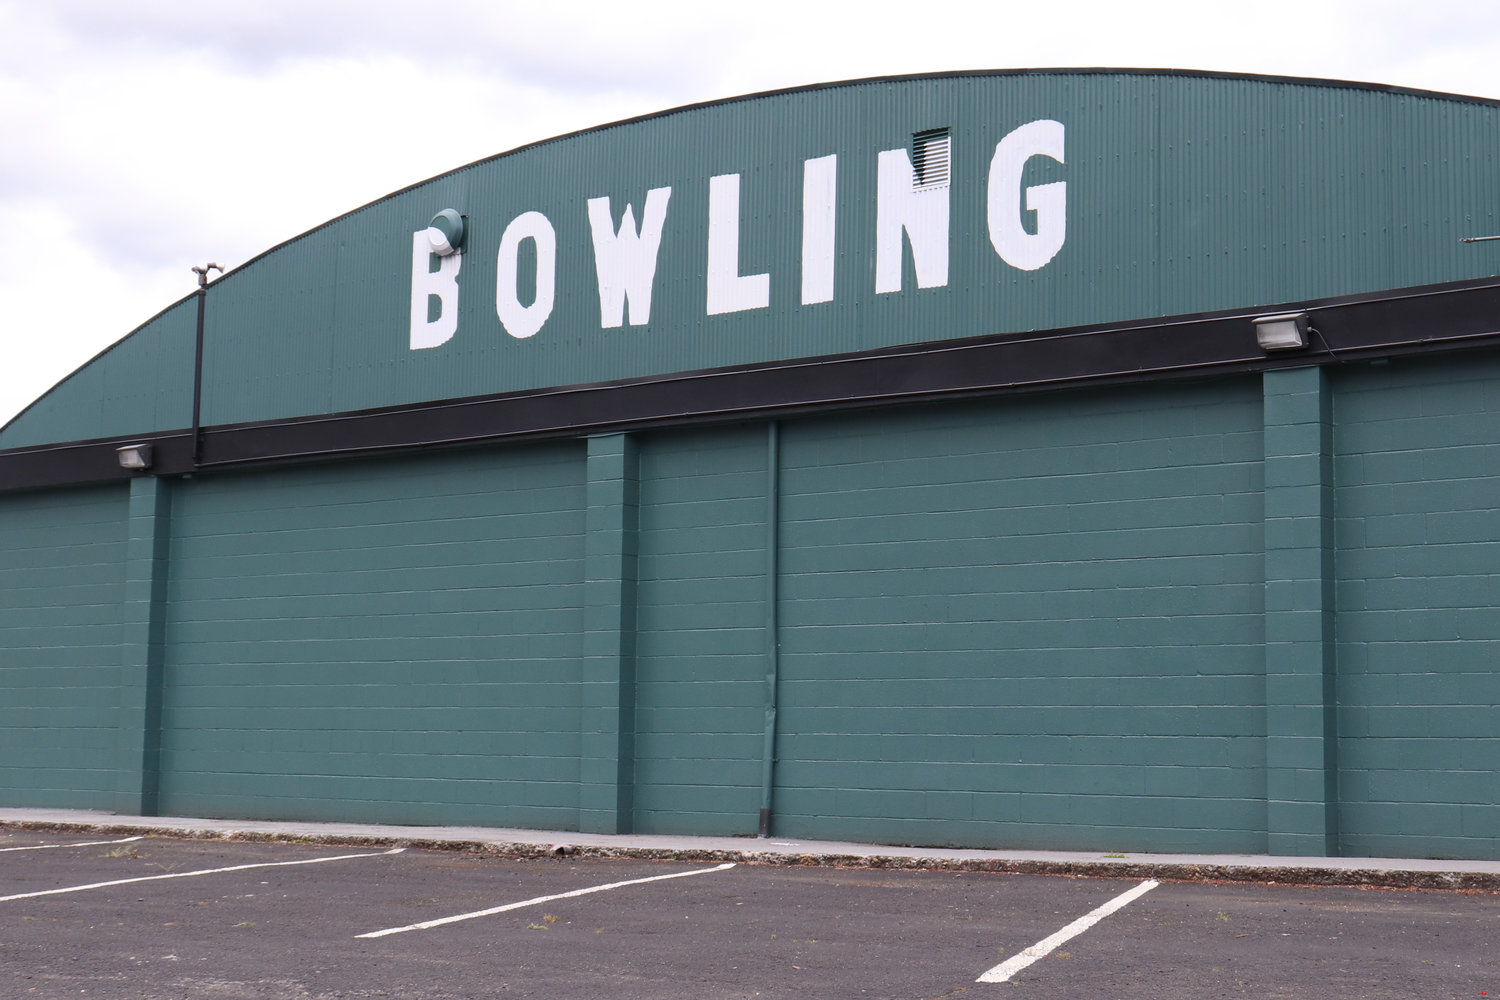 New Fairway Lanes owners Jeff and Julie Walker said they anticipate holding an official grand opening on Aug. 1. 